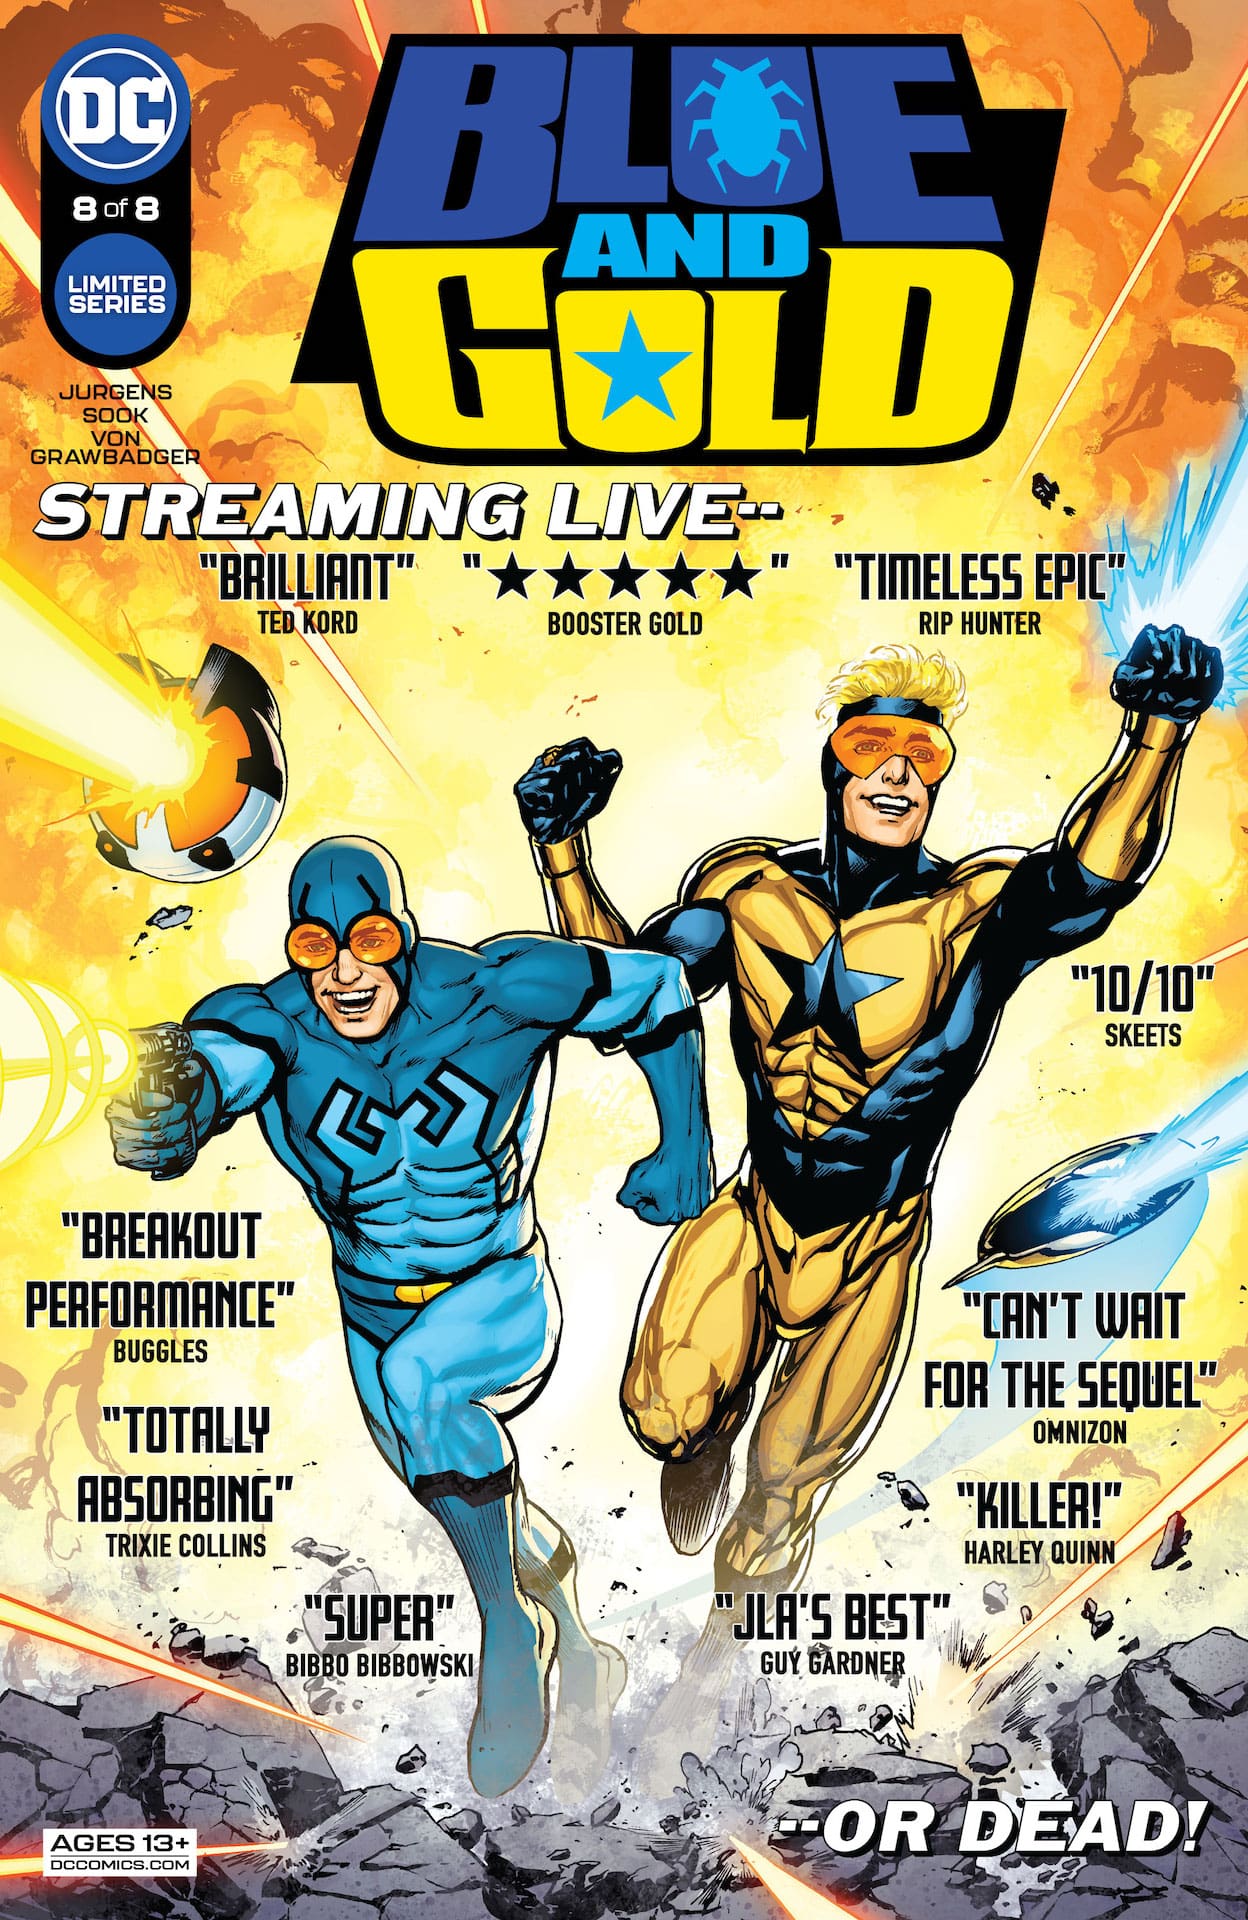 DC Preview: Blue & Gold #8